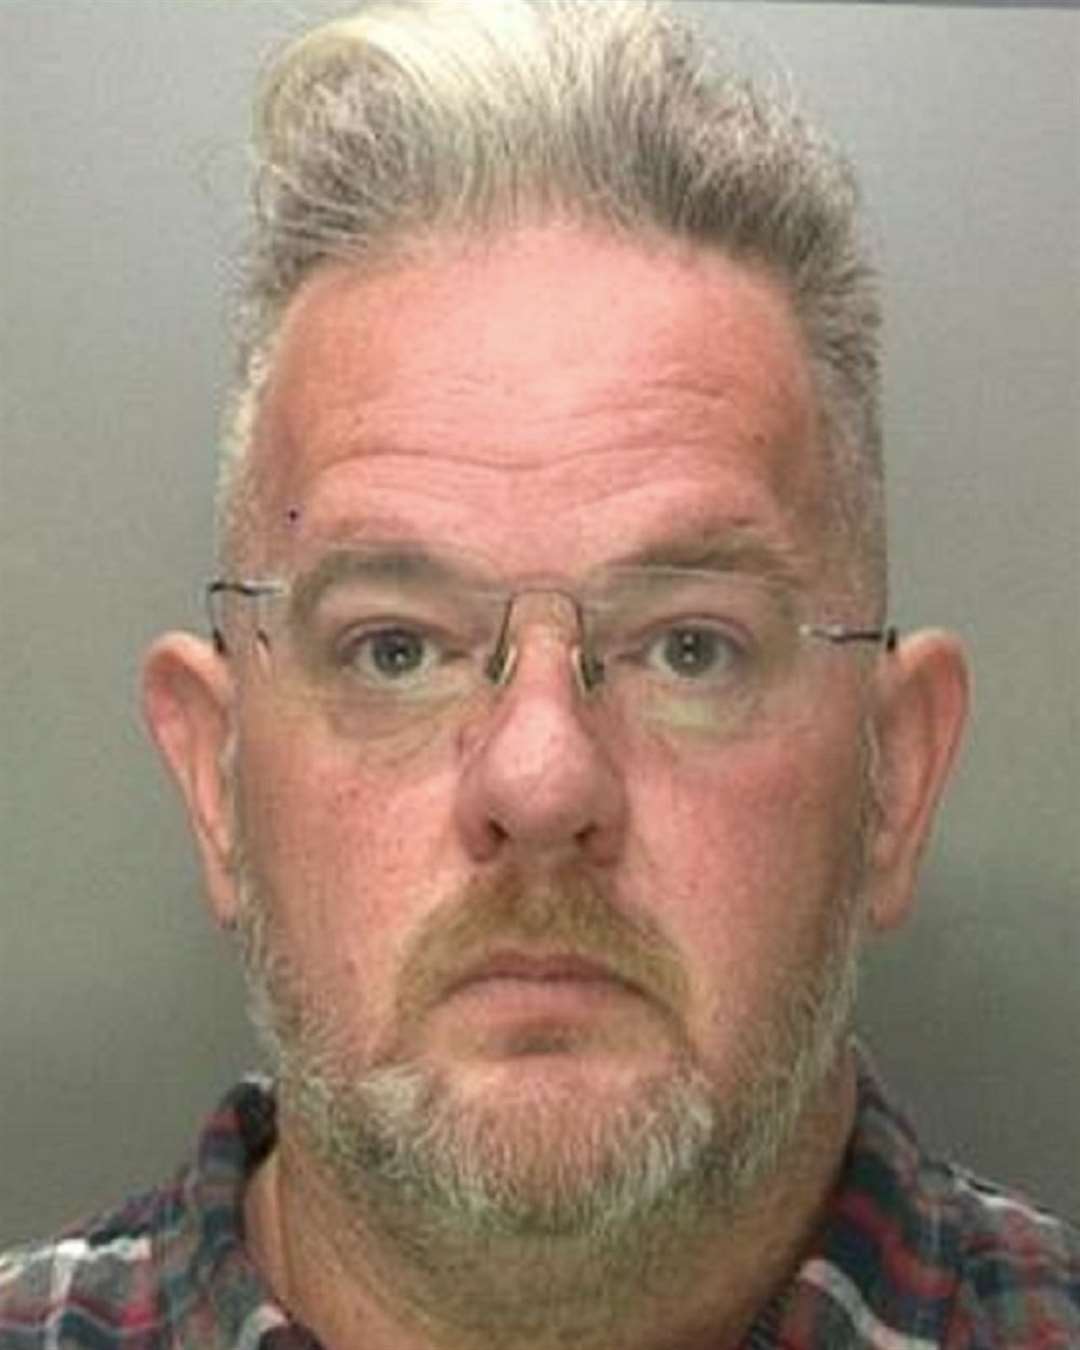 A mugshot issued by the National Crime Agency of former Conservative Party campaign manager Mark Lerigo (NCA/PA)